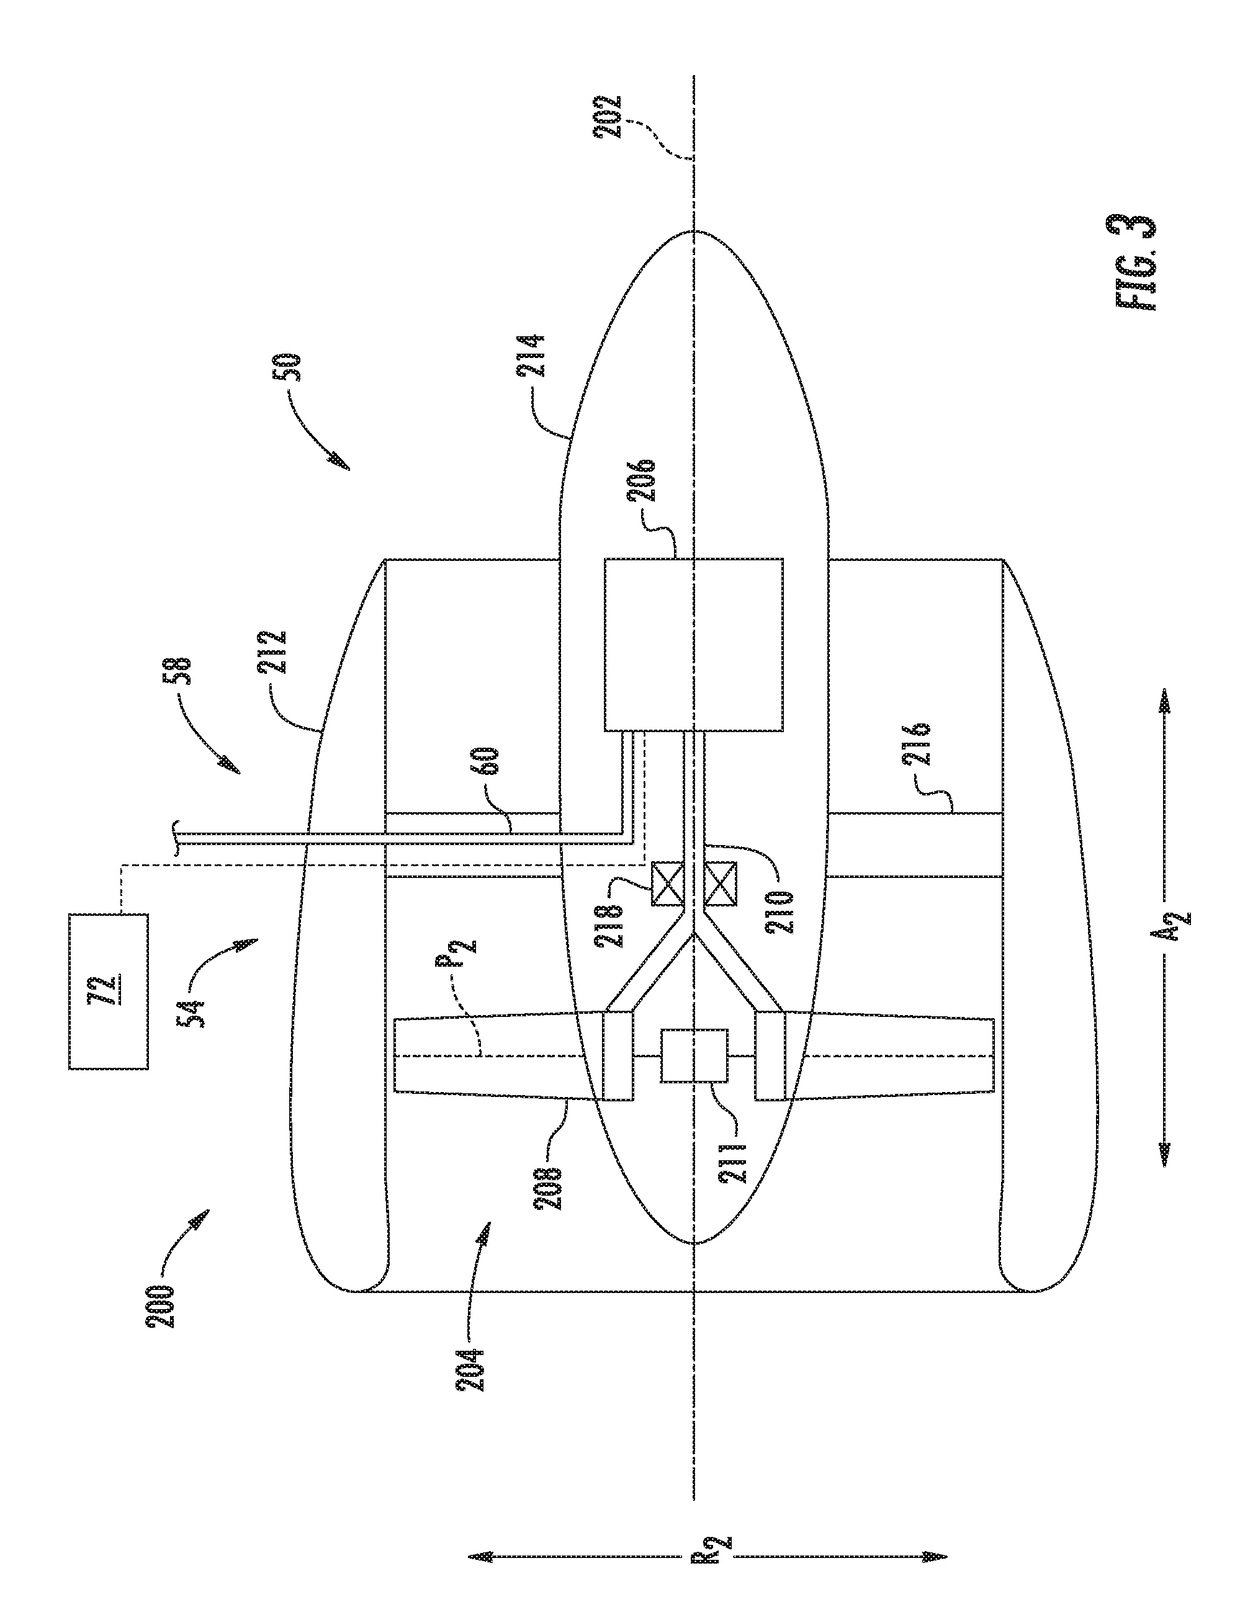 Hybrid-electric propulsion system for an aircraft